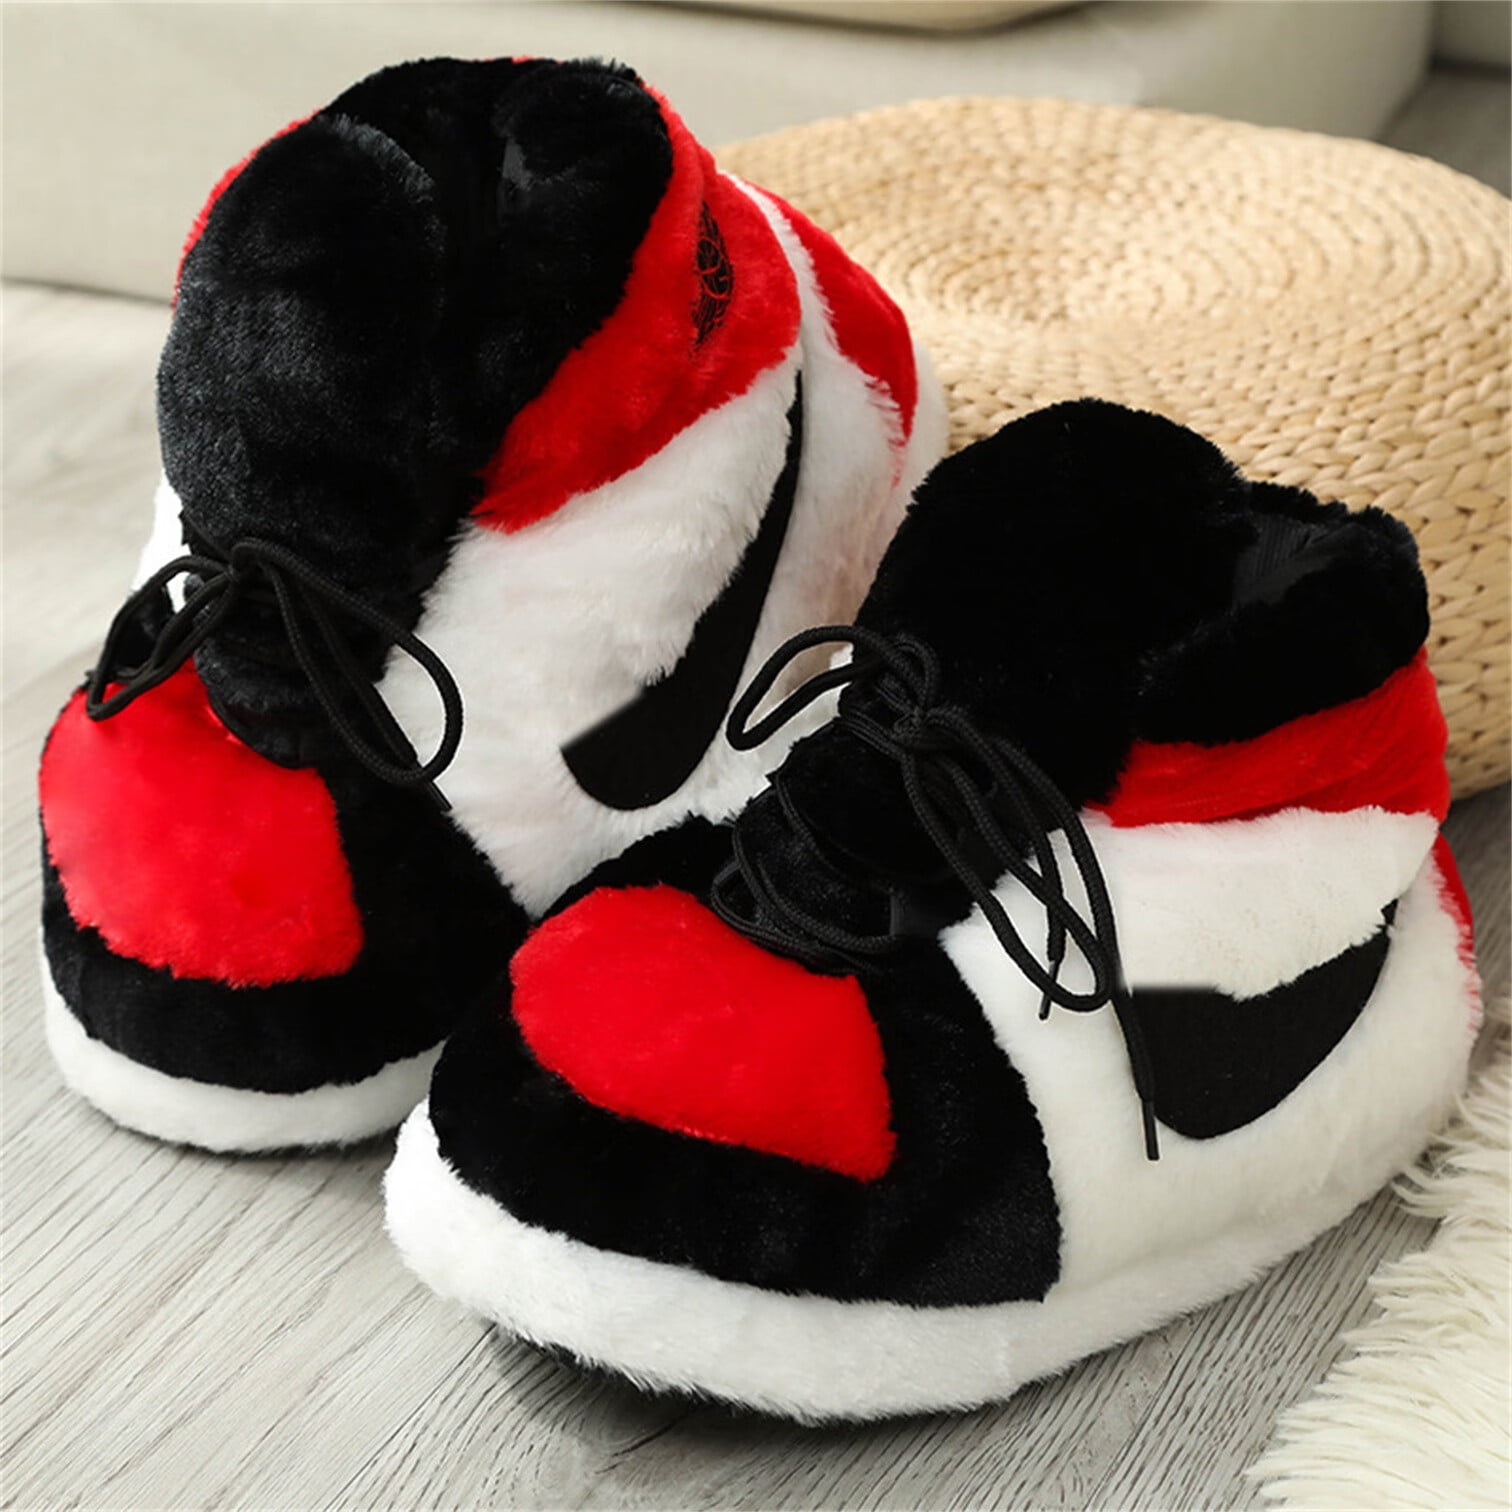 Uni Sneaker Slippers Winter Warm, One Size Fits All Plush House Slides  Fluffy Indoor House Shoes Sneakers Drop Delivery Garden Wear EU 35 44 From  Jtdhshop, $9.24 | DHgate.Com